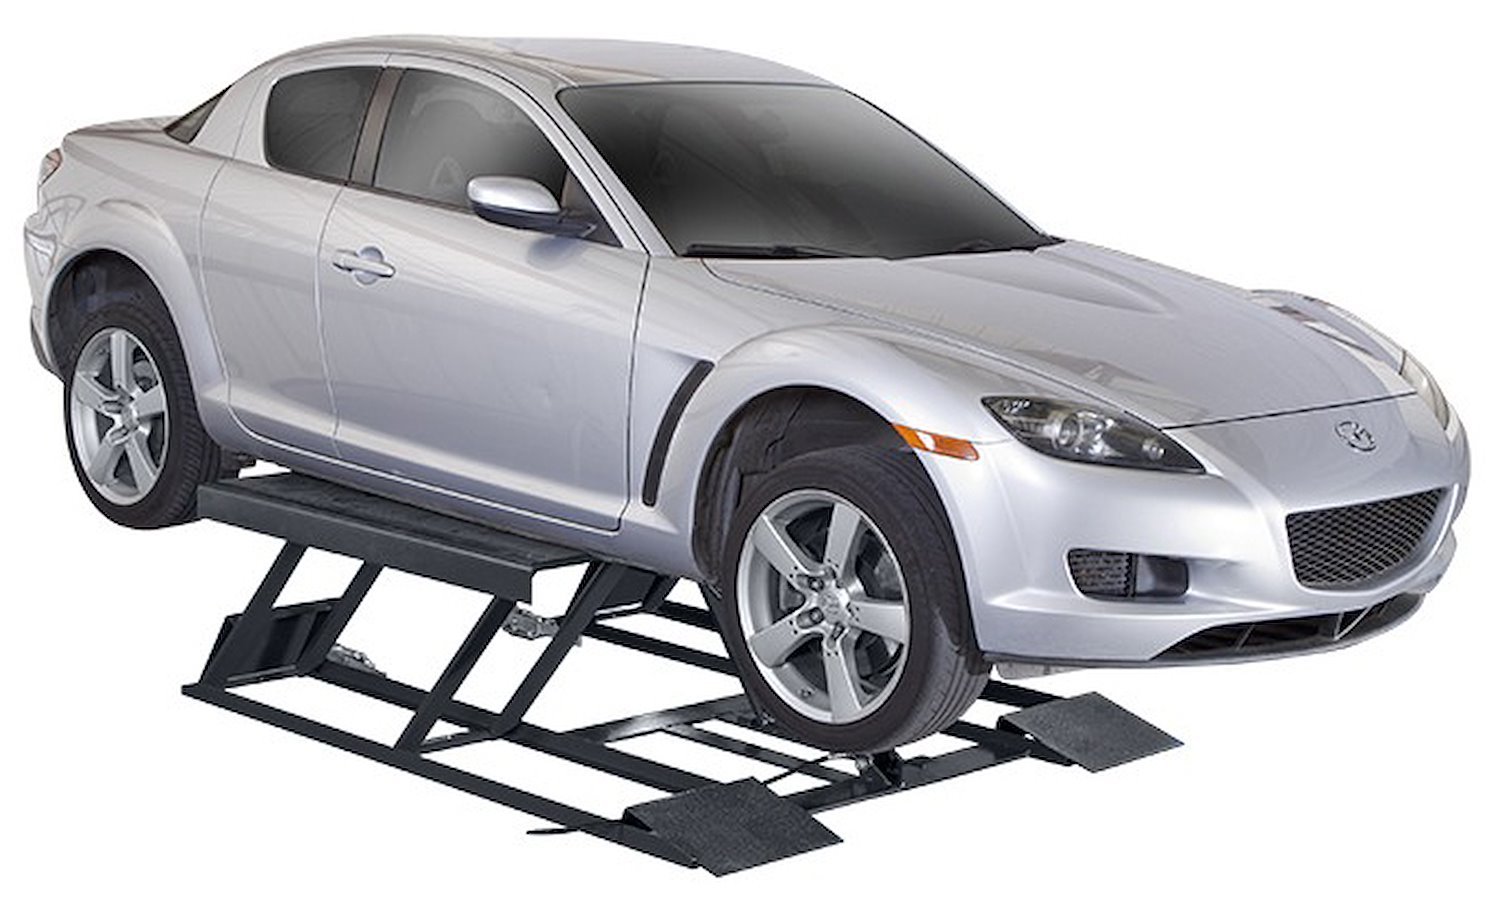 LR-60P Portable Low-Rise Scissor Vehicle Lift, 6,000 lbs. Capacity, 26 in. Max Rise